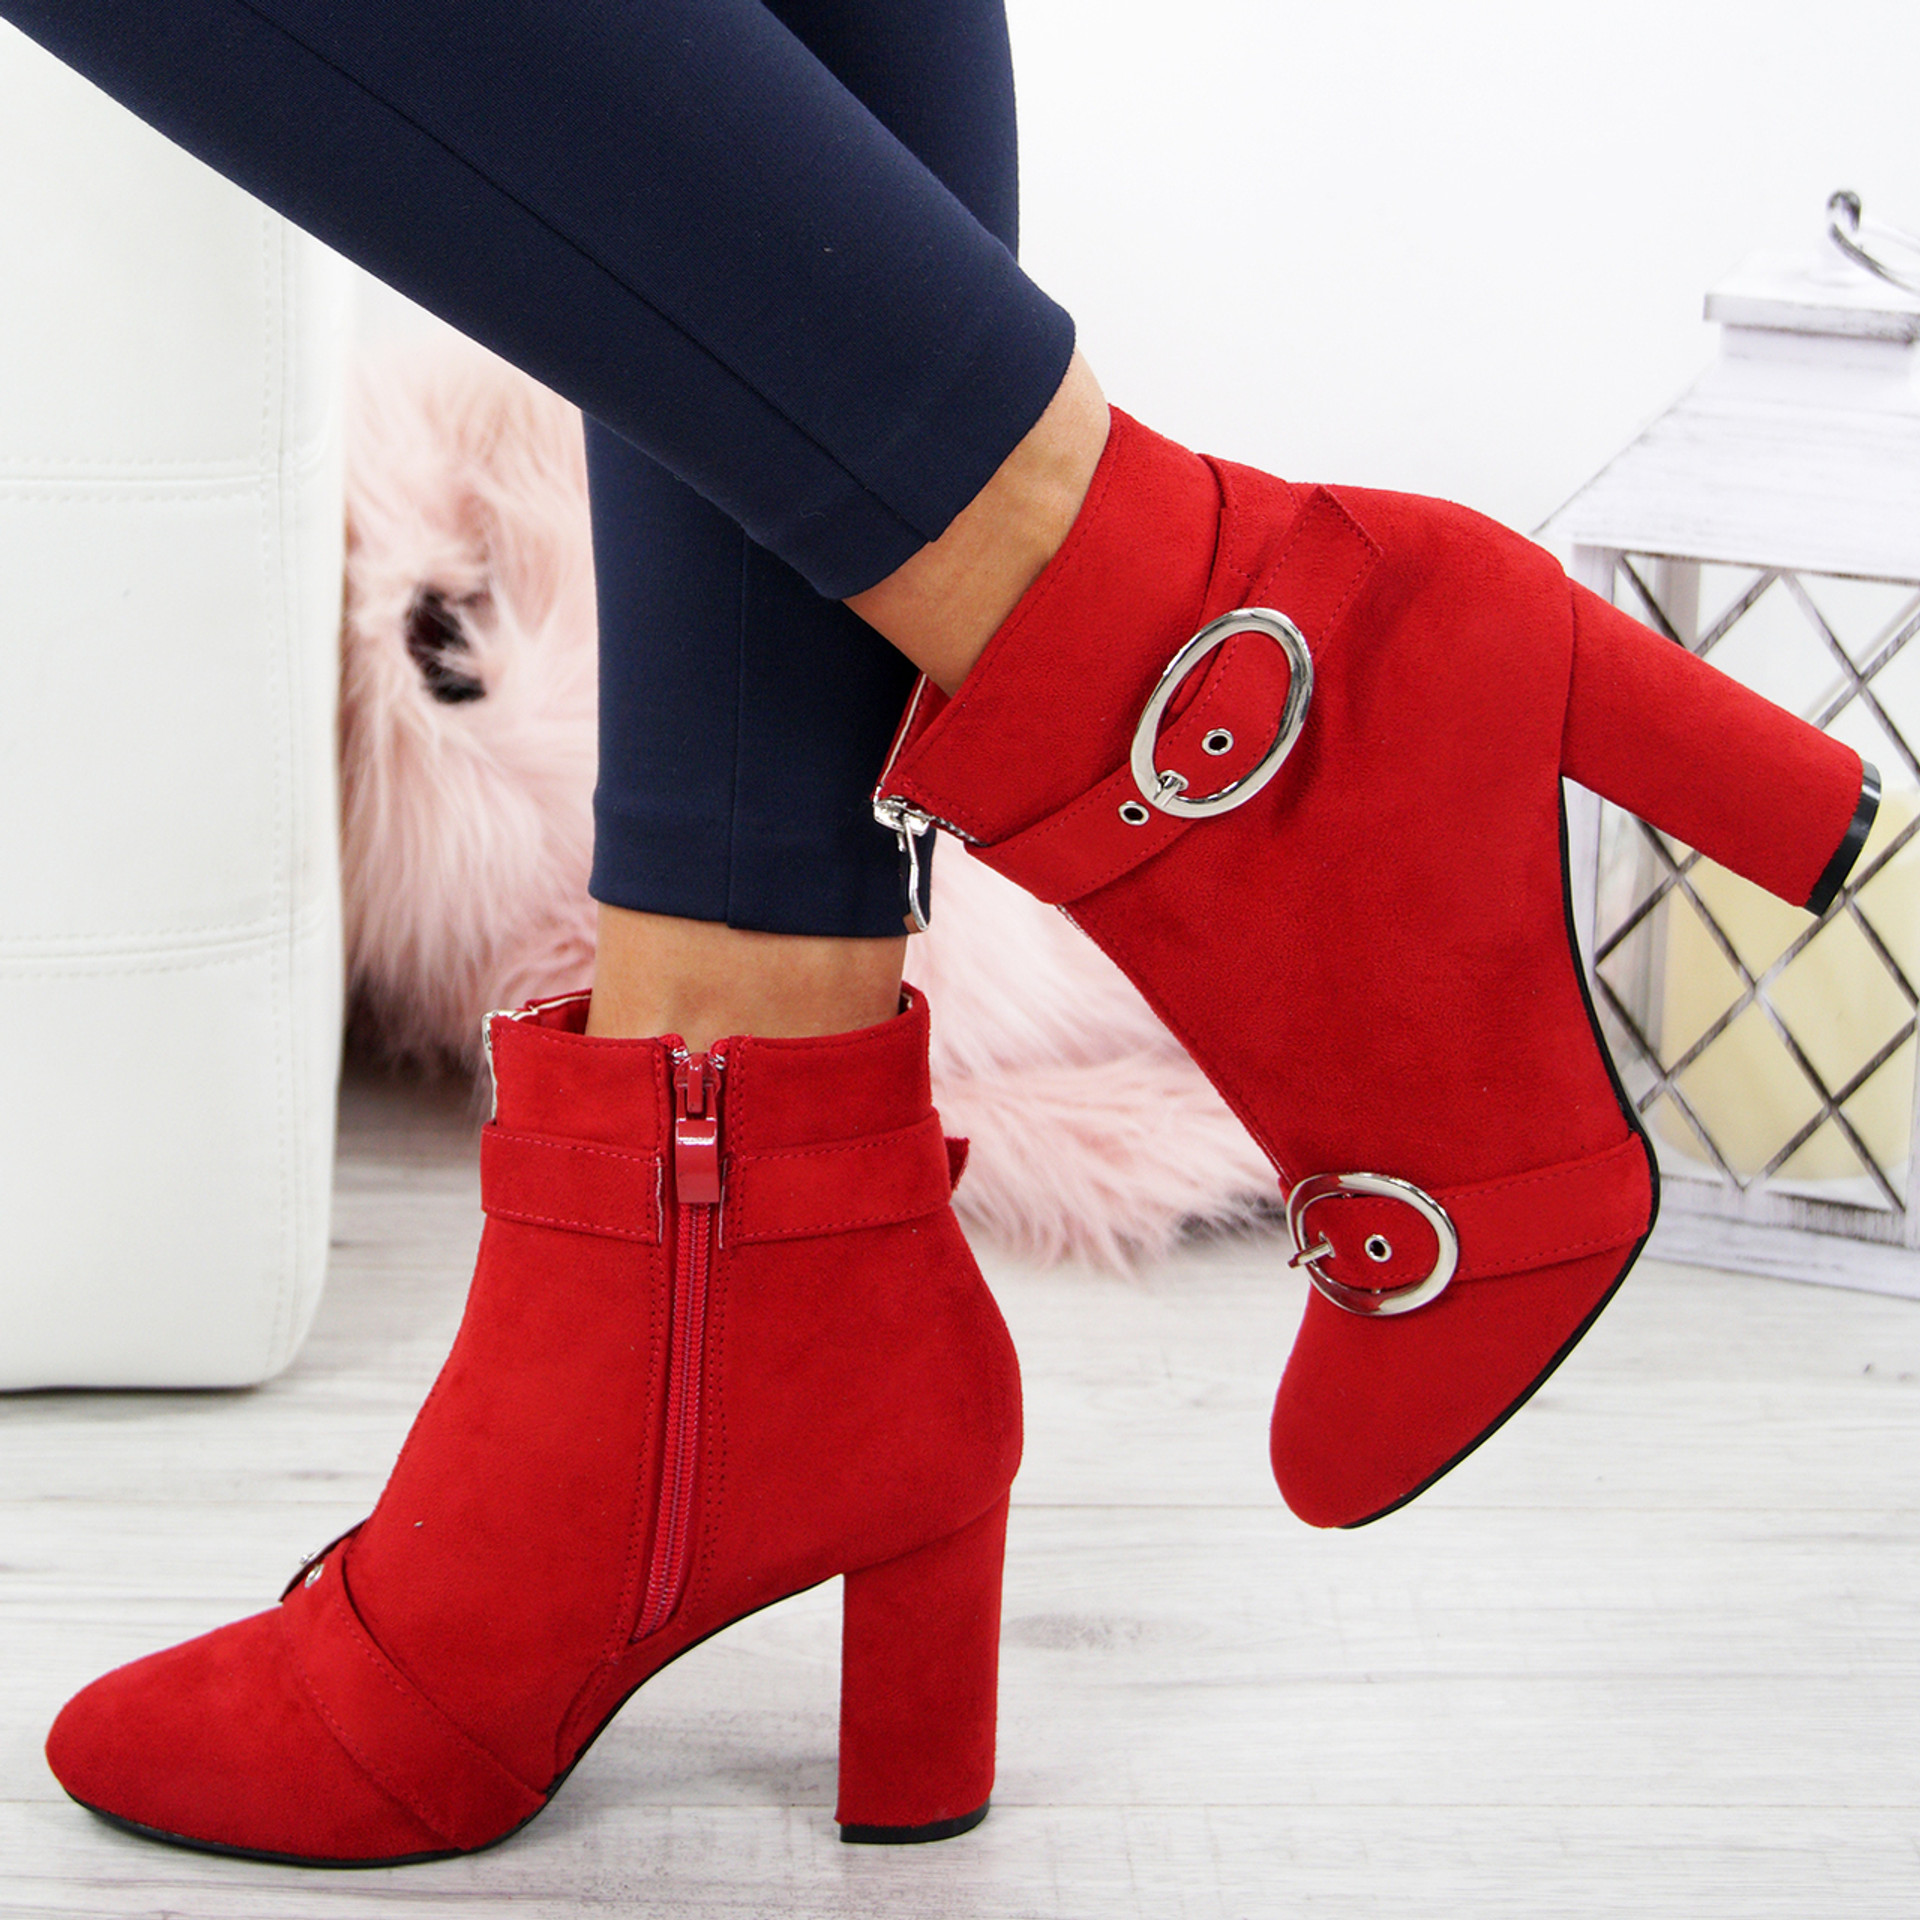 Finley Red Block Heel Ankle Boots